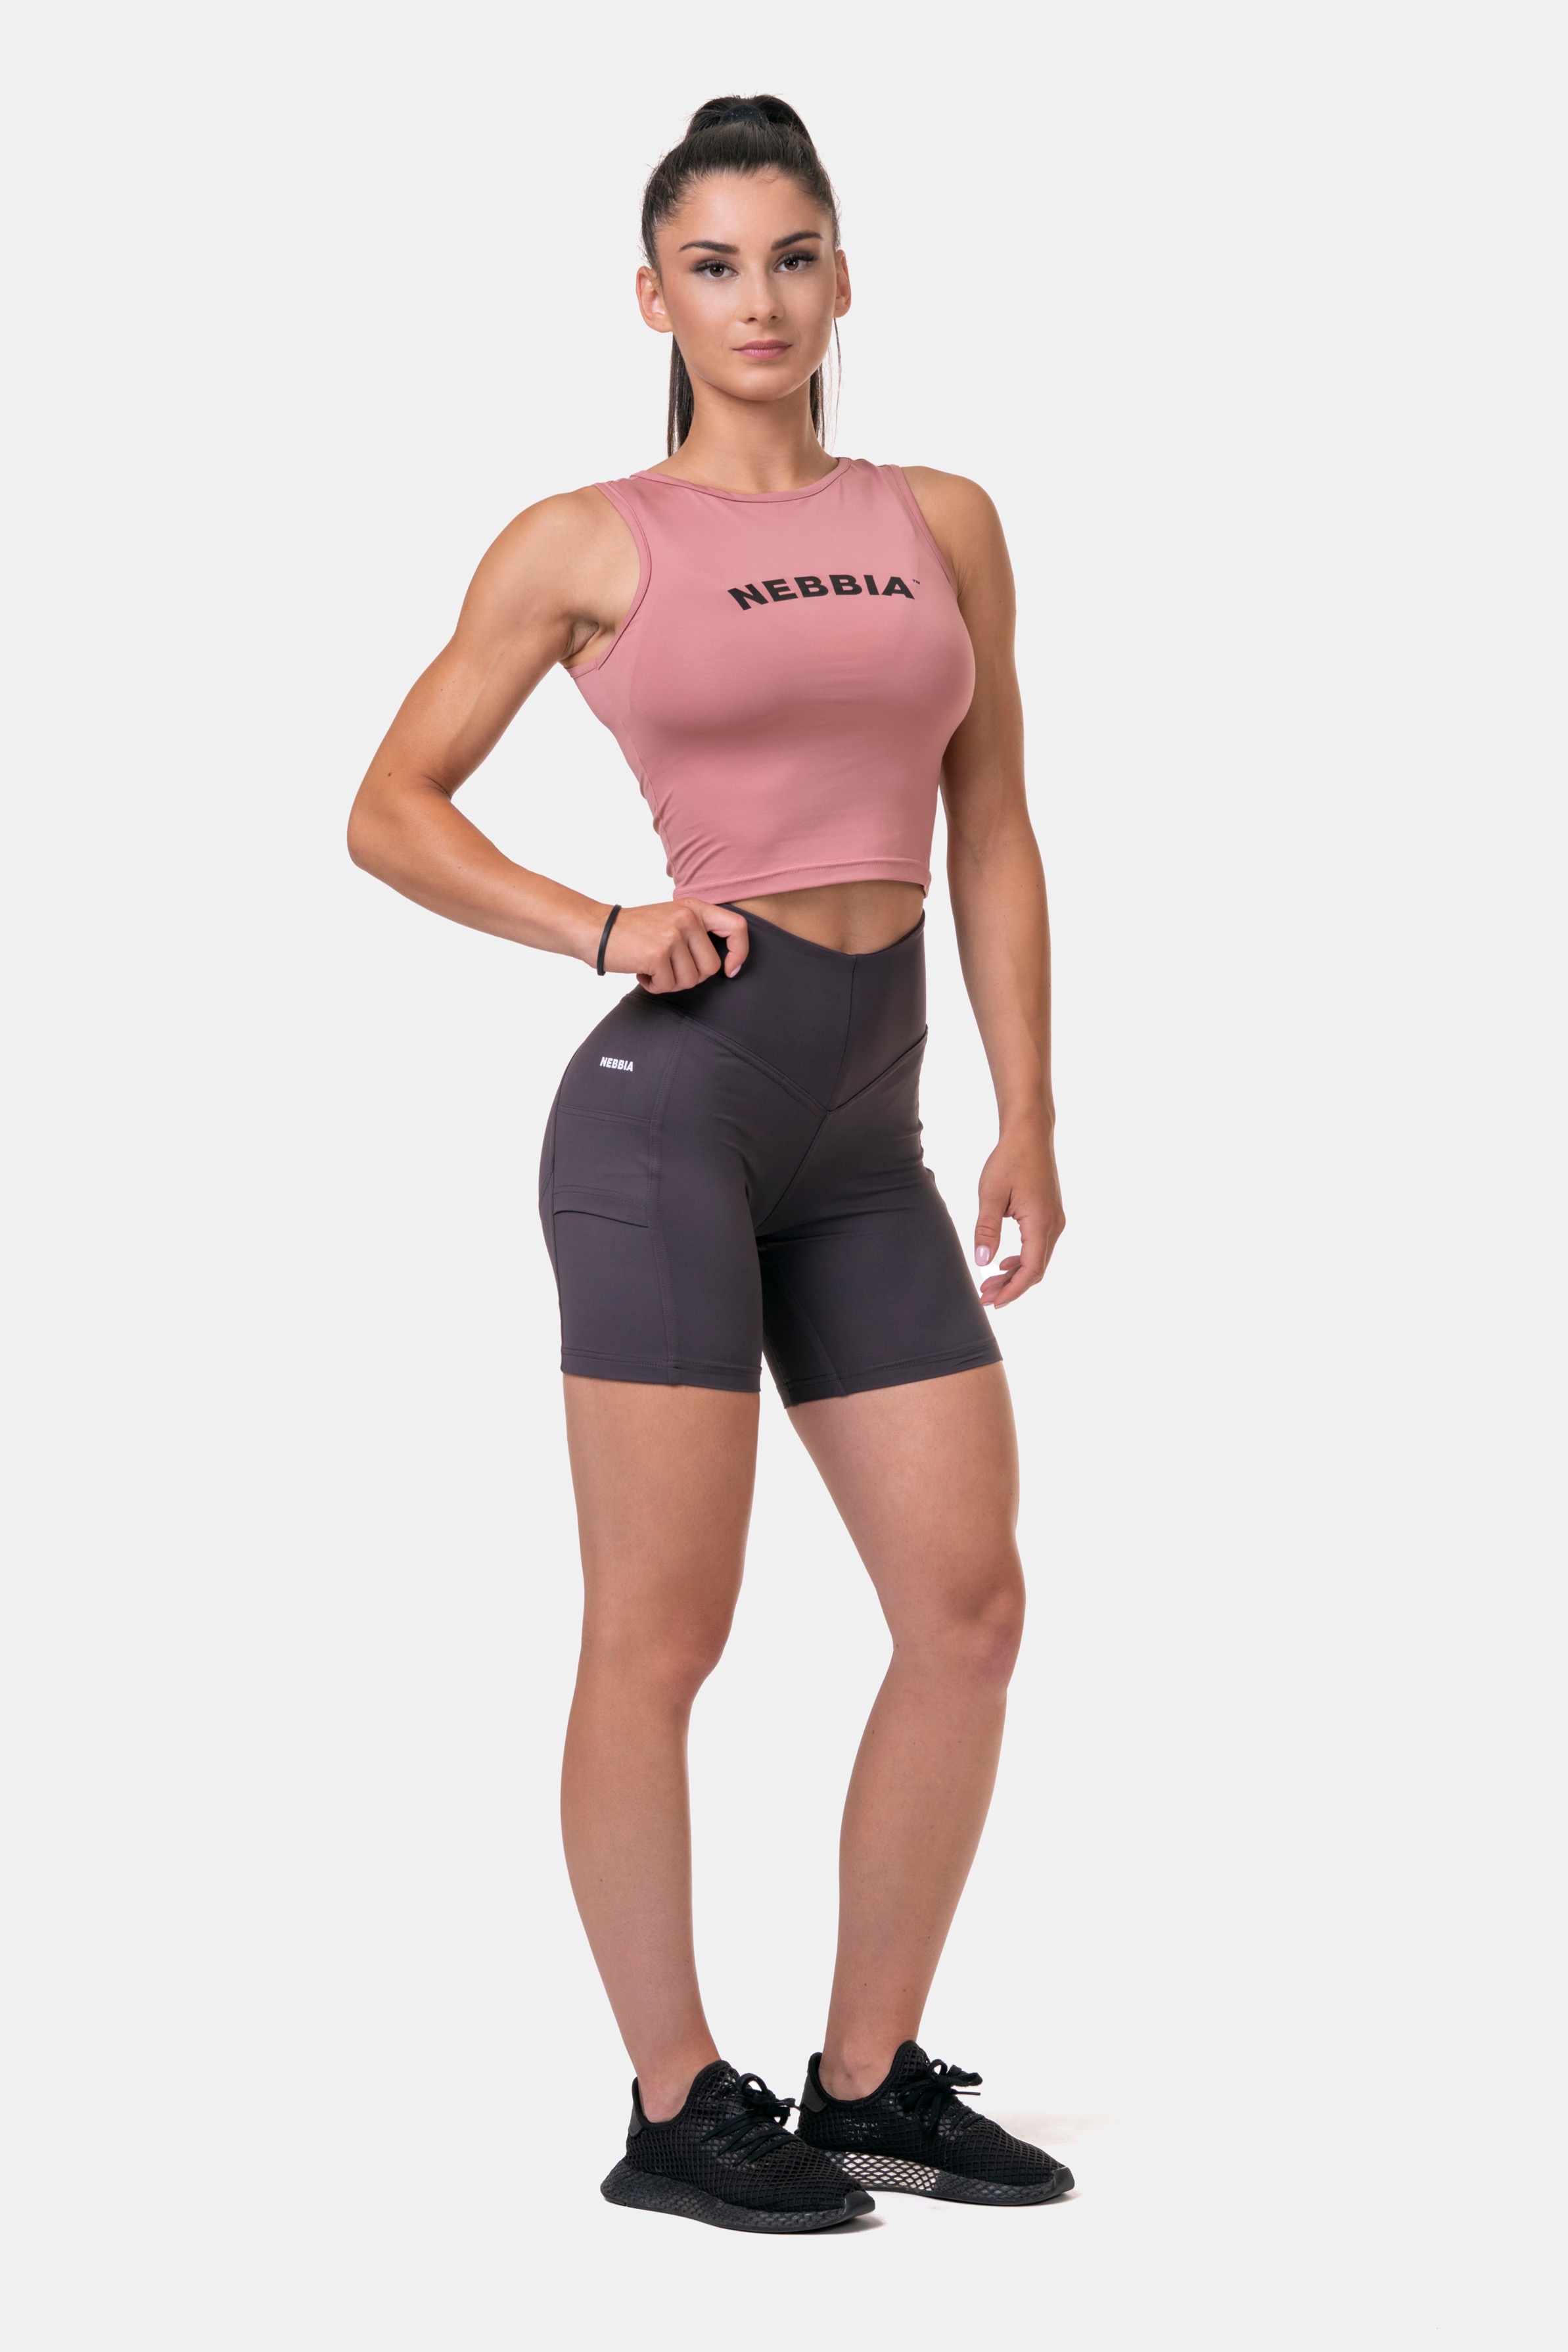 nebbia-fit-and-sporty-top-577-old-rose